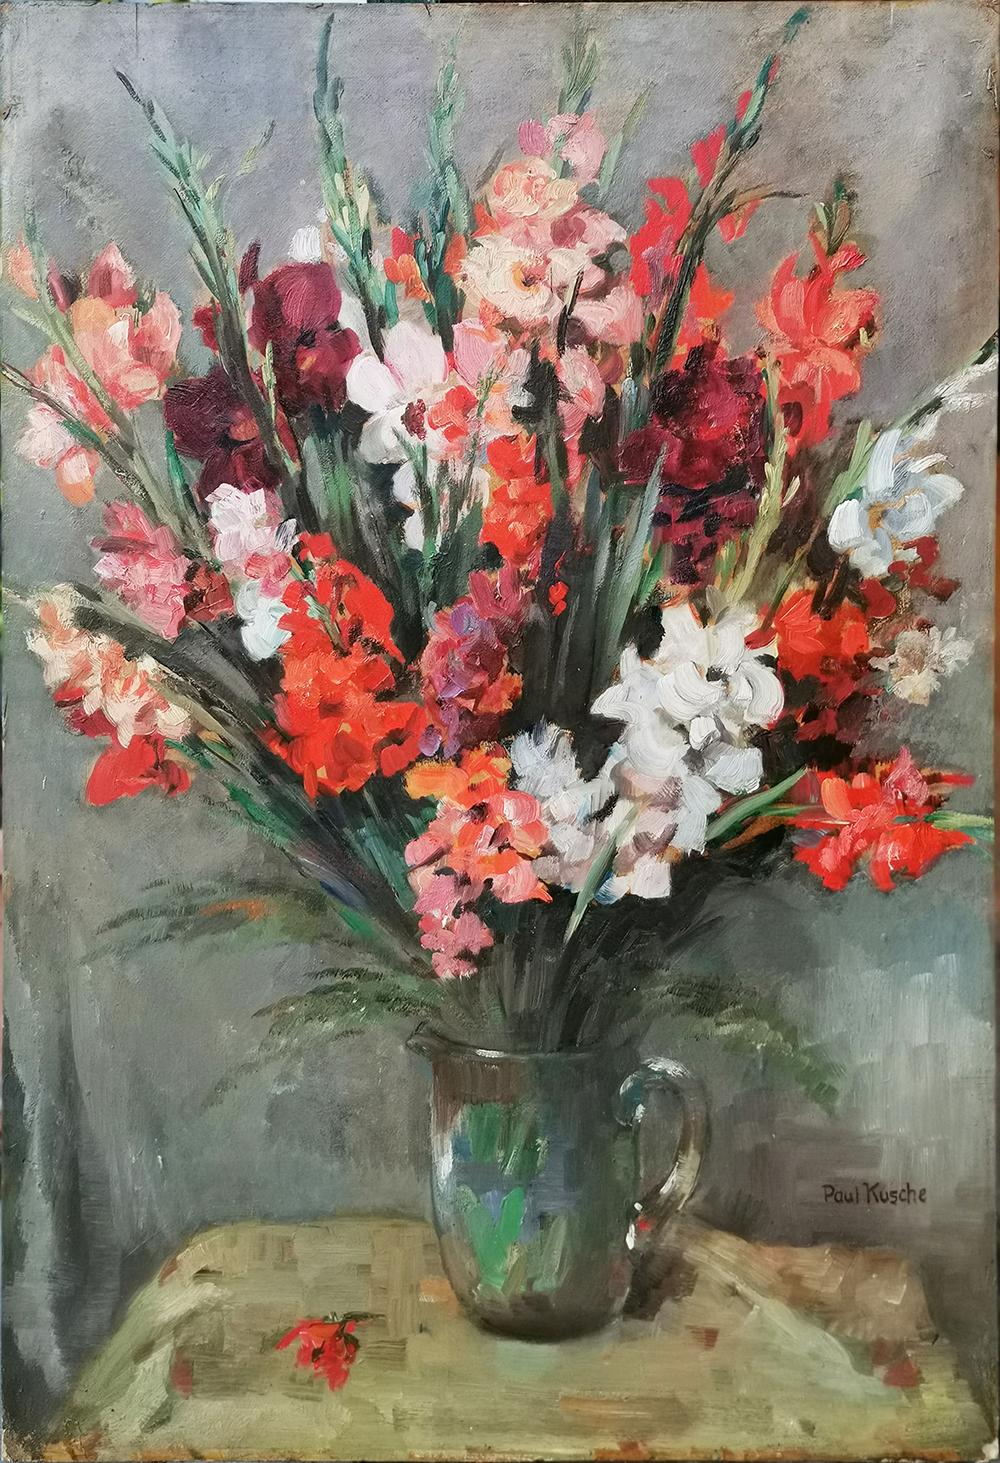 Kusche, Paul (1882-1952), flower vase with gladiolus
Measures:
100 cm x 70 cm (frame excluded)
39.4 in x 27.6 in (frame excluded)
oil on board, 1920

Ancient painting depicting a floral composition with red, pink and white gladiolus, contained